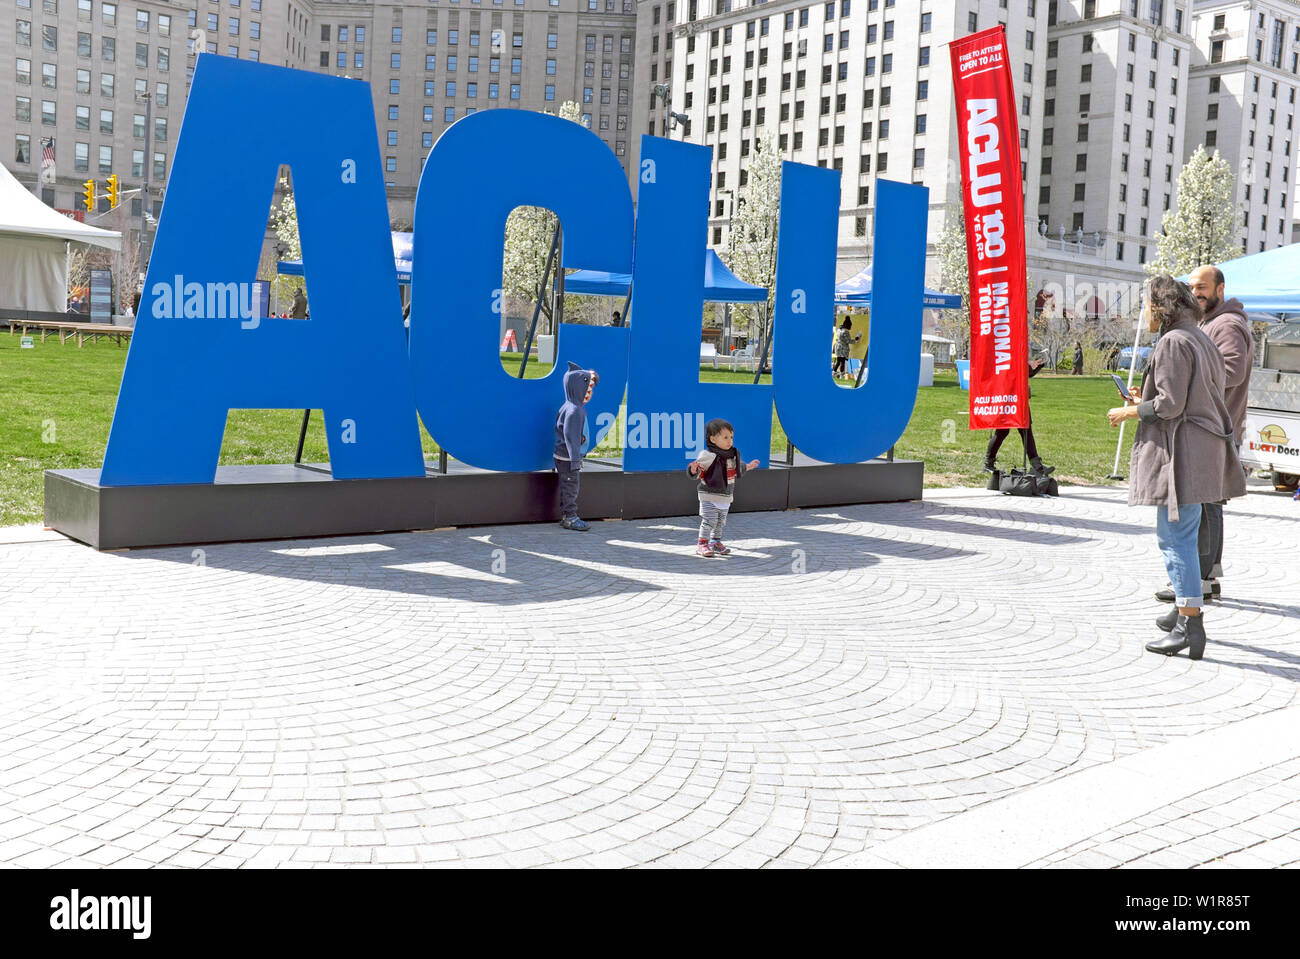 ACLU display as part of the national tour 'The Future We Dare To Create' in Public Square on its visit to Cleveland, Ohio, USA. Stock Photo